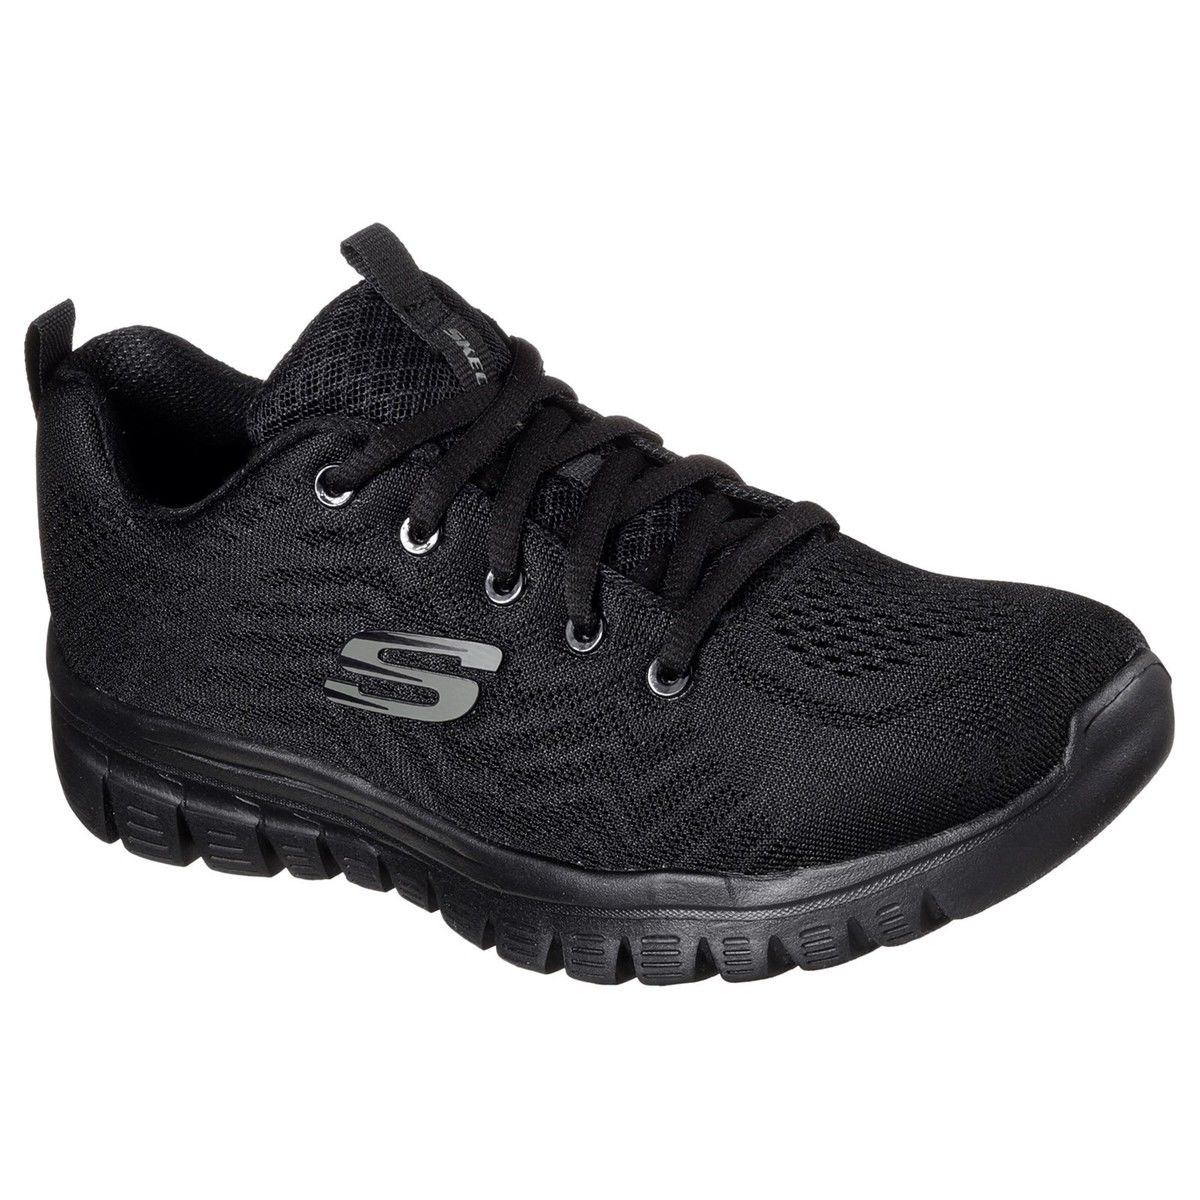 Skechers Graceful Get Connected BBK Black Womens trainers in a Plain Textile in Size 5